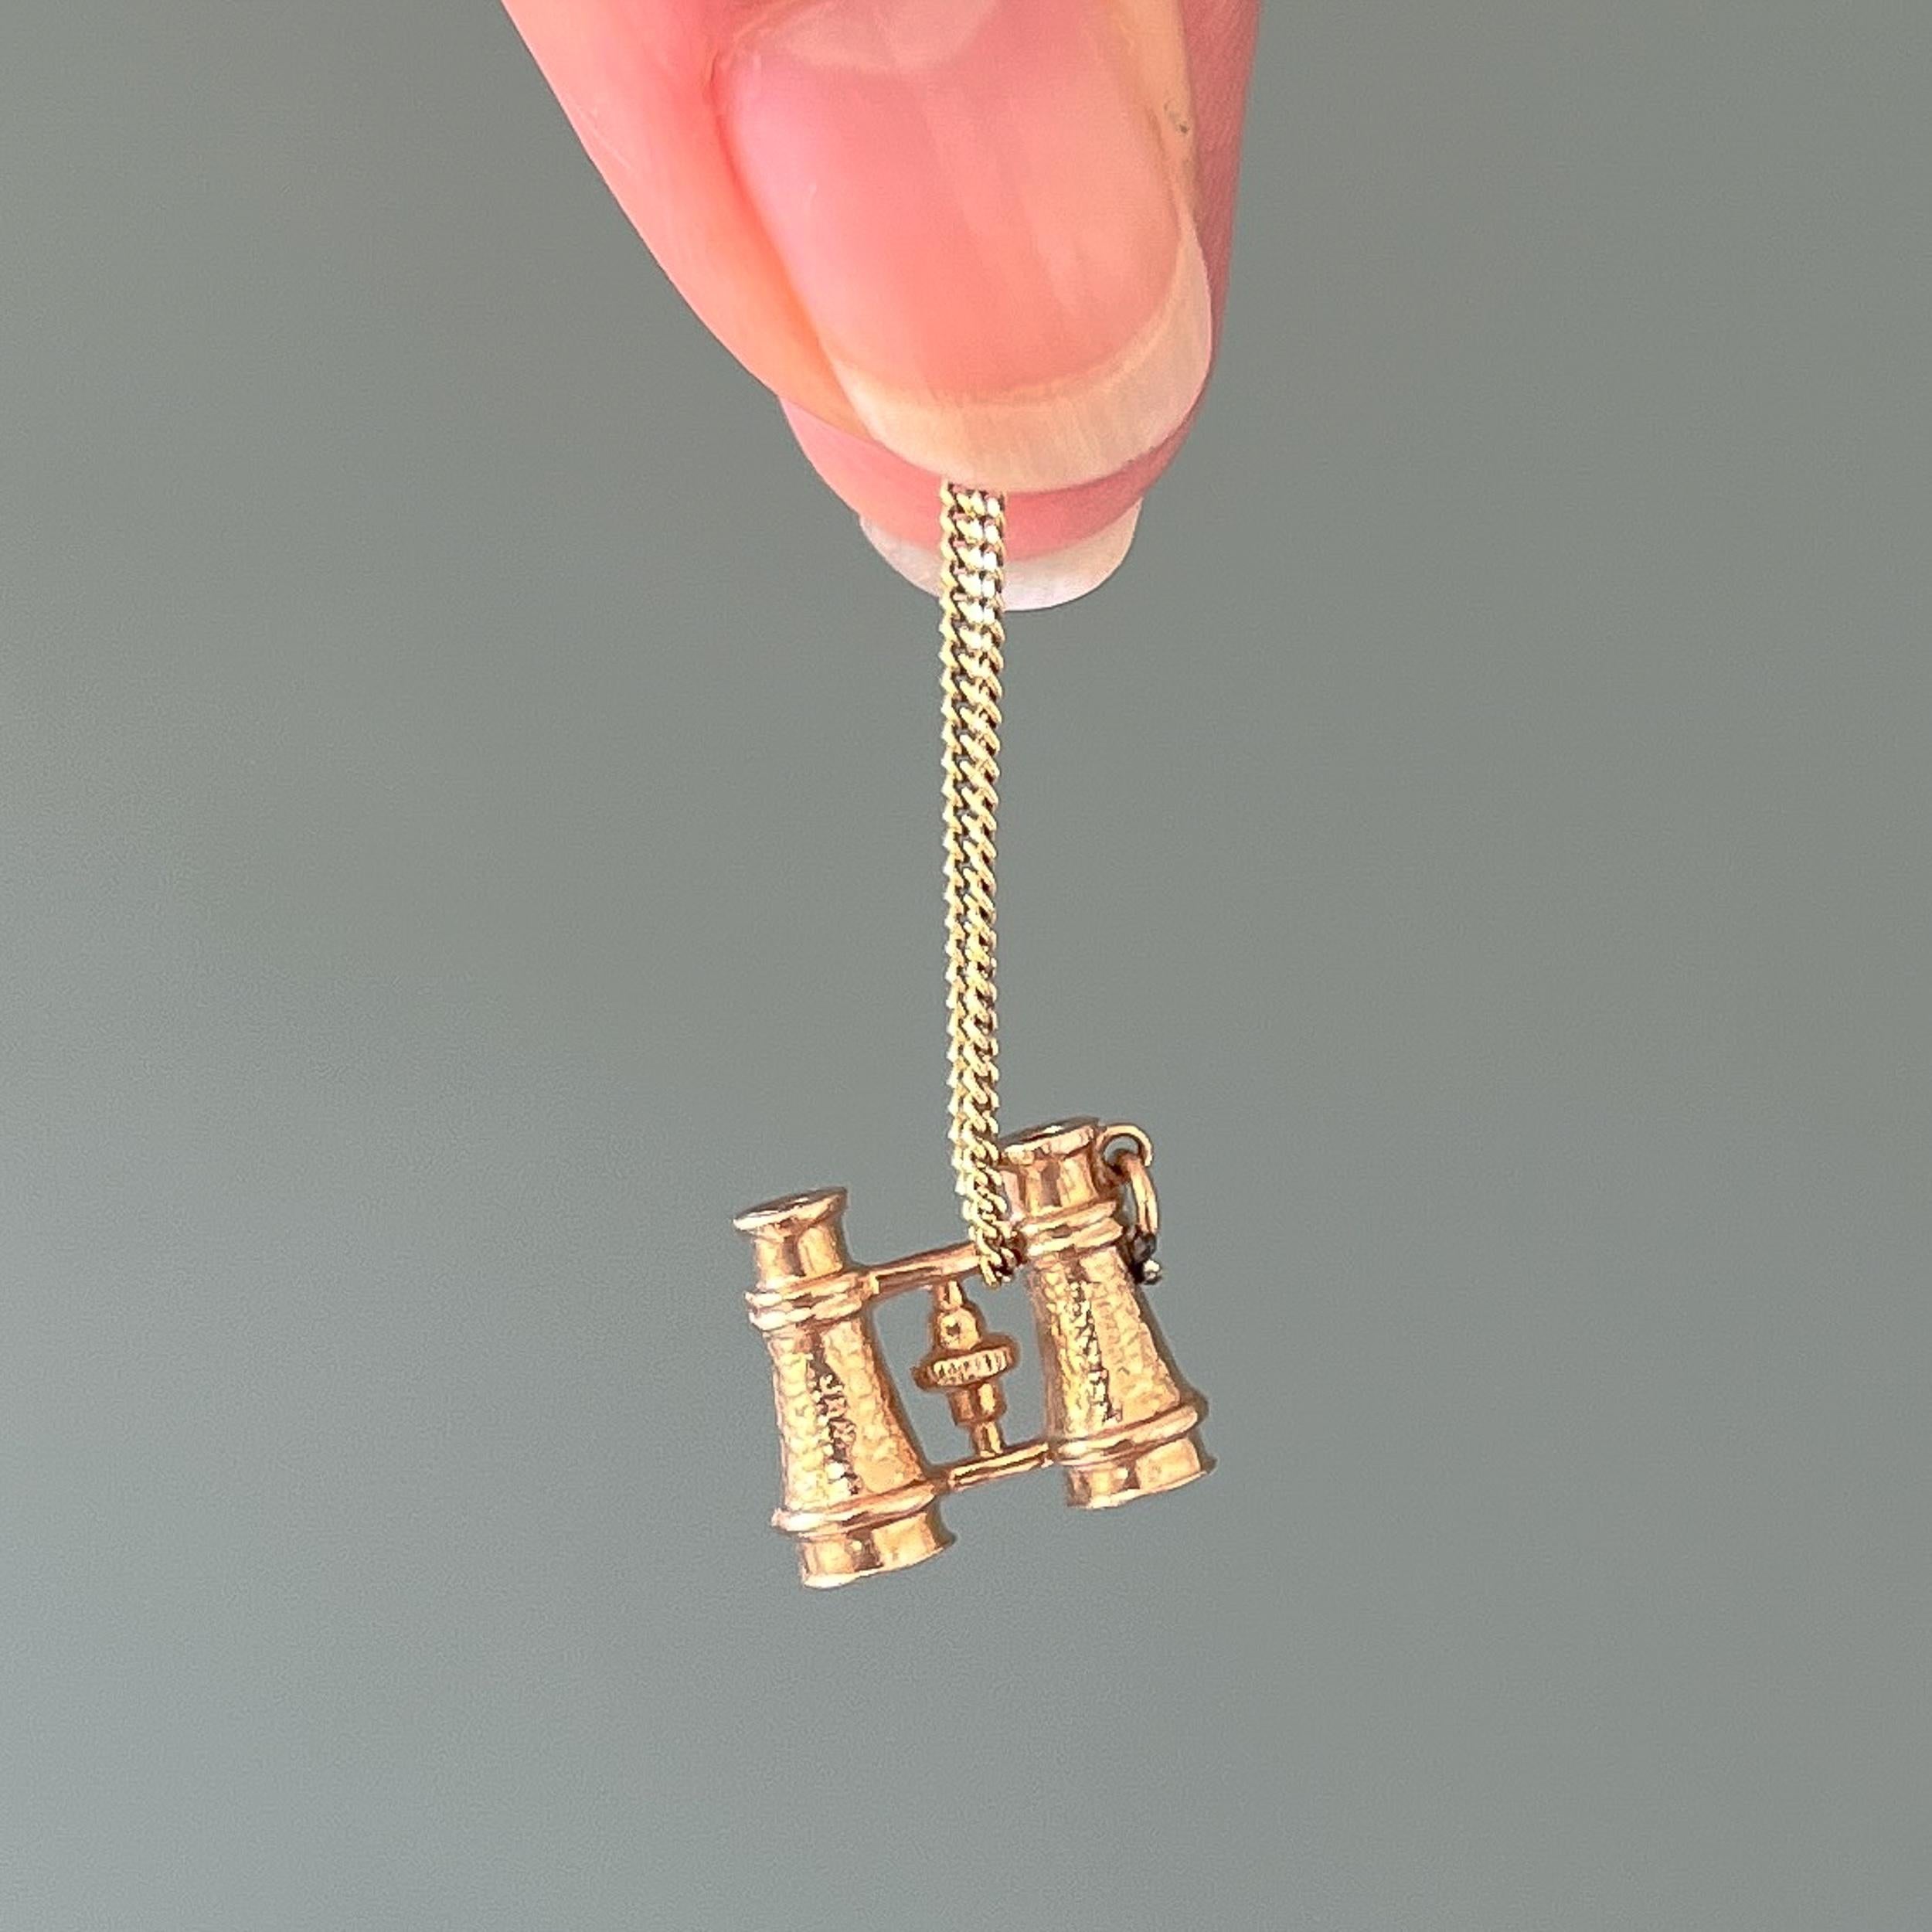 A vintage 9 karat yellow gold opera binoculars charm pendant. This miniature Galilean binoculars charm is usually used at performance events, whose name is derived from traditional use of binoculars at opera performances. It has nice details and